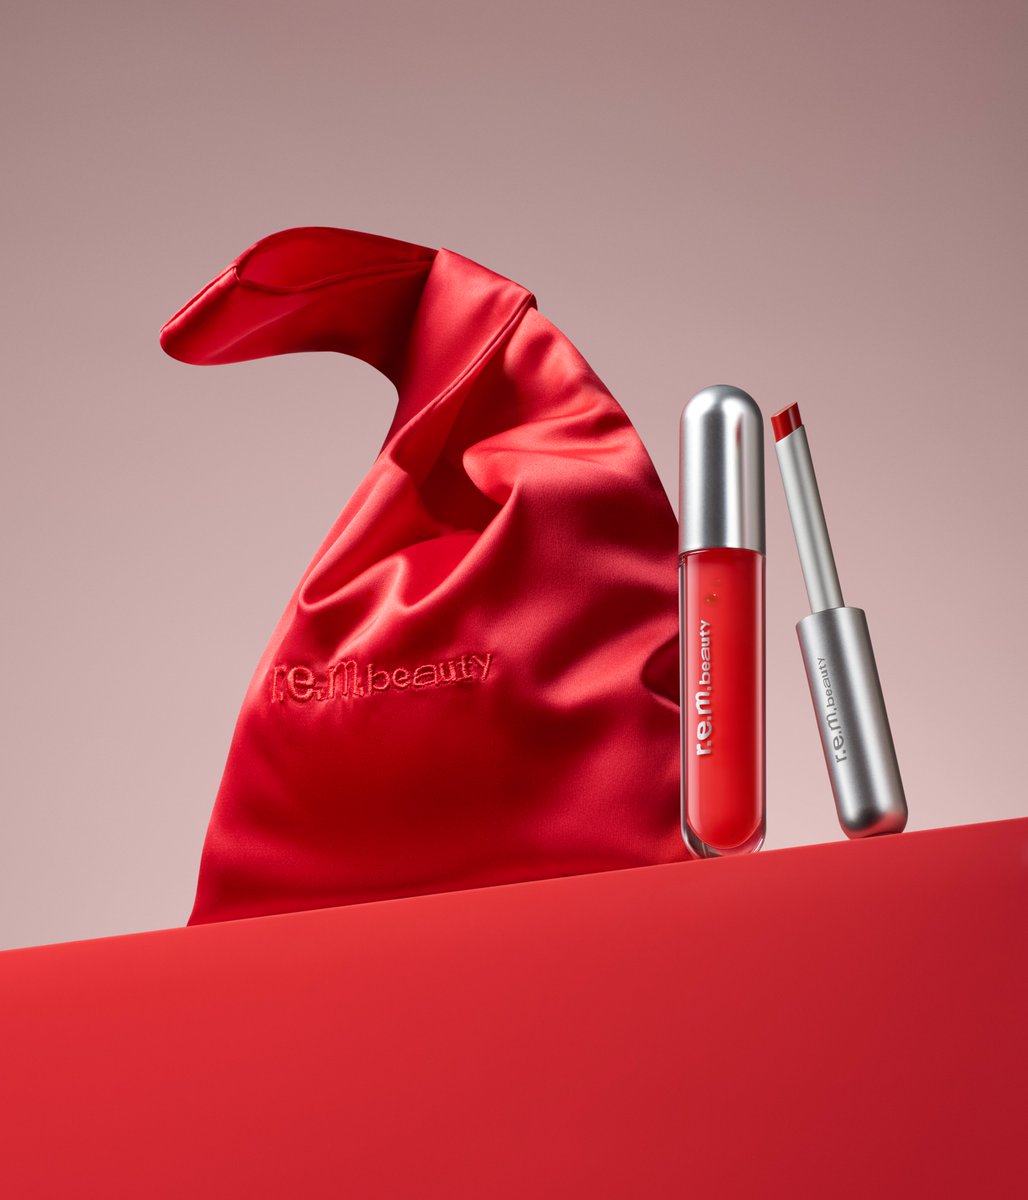 introducing the eternally red lip set ♾☼ ⋆｡˚⋆ this limited-edition set puts a glossy spin on ari's go-to red lip inspired by her latest album

includes:
▫️ #onyourcollar classic lipstick in “attention”
▫️ #essentialdrip glossy balm in “shirley”
▫️ an exclusive red satin…